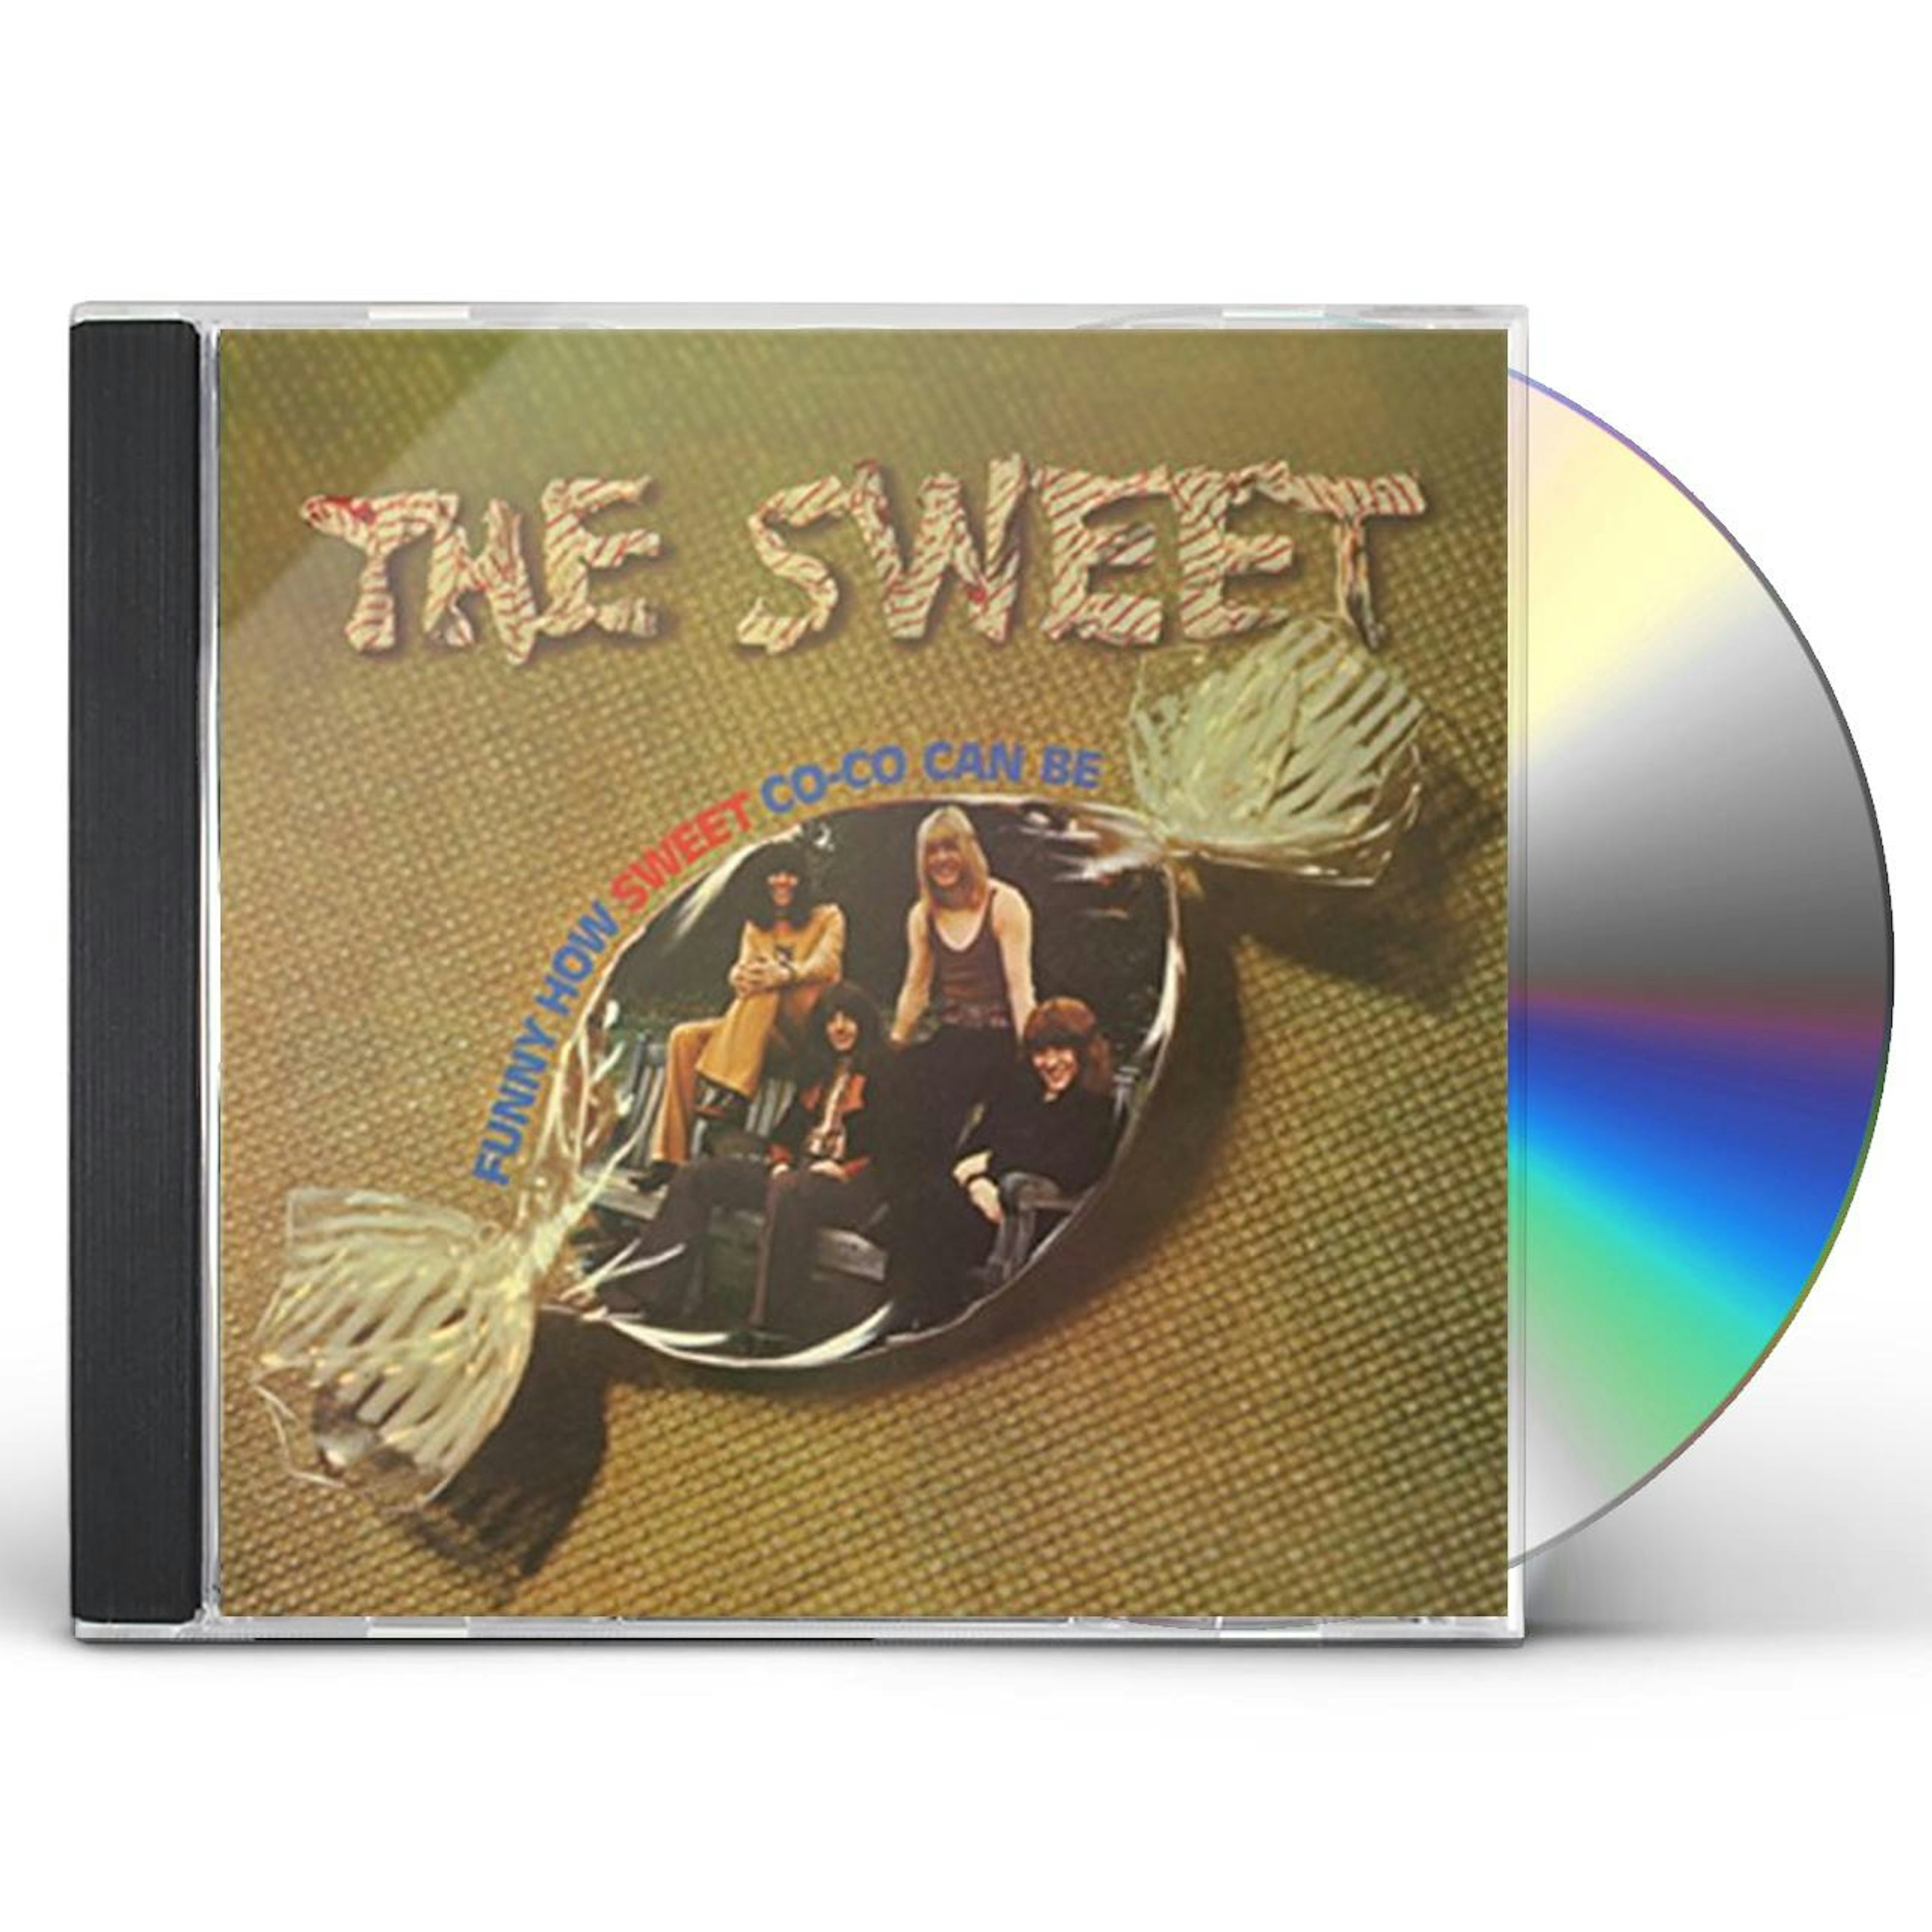 FUNNY HOW SWEET CO-CO CAN BE: EXPANDED EDITION CD